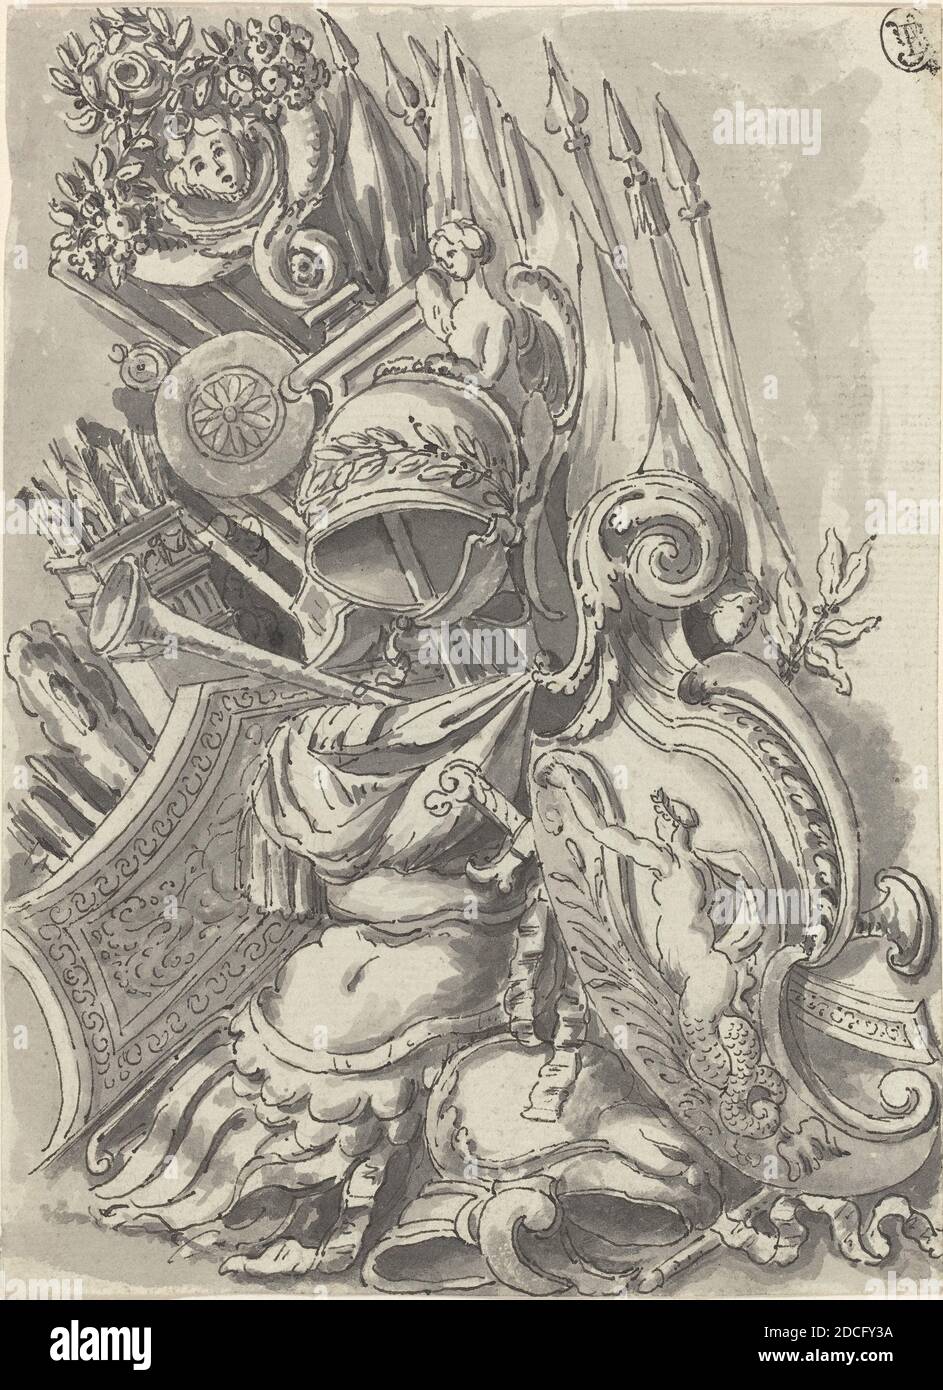 Jean Lepautre, (artist), French, 1618 - 1682, A Trophy of Arms, pen and black ink with gray wash on laid paper, overall: 16 x 11.8 cm (6 5/16 x 4 5/8 in Stock Photo